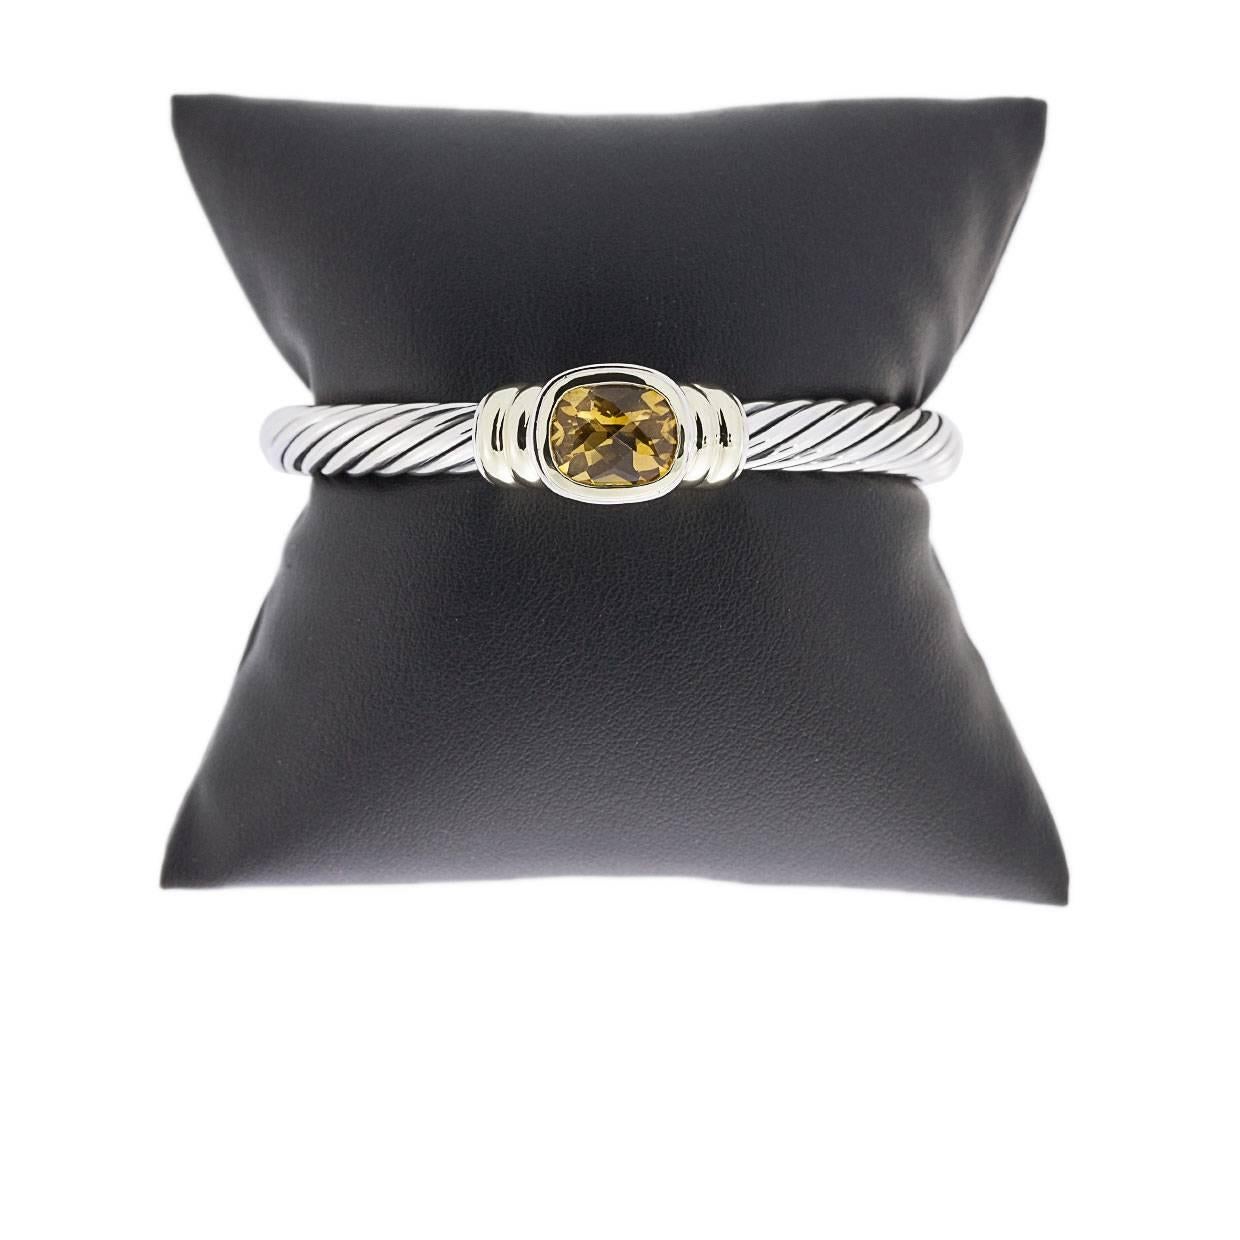 David Yurman's cable style jewelry has become his signature, the unifying element of every collection. This classic cuff bracelet from Yurman's Noblesse Collection showcases that iconic cable design in sterling silver & 14 karat yellow gold. The